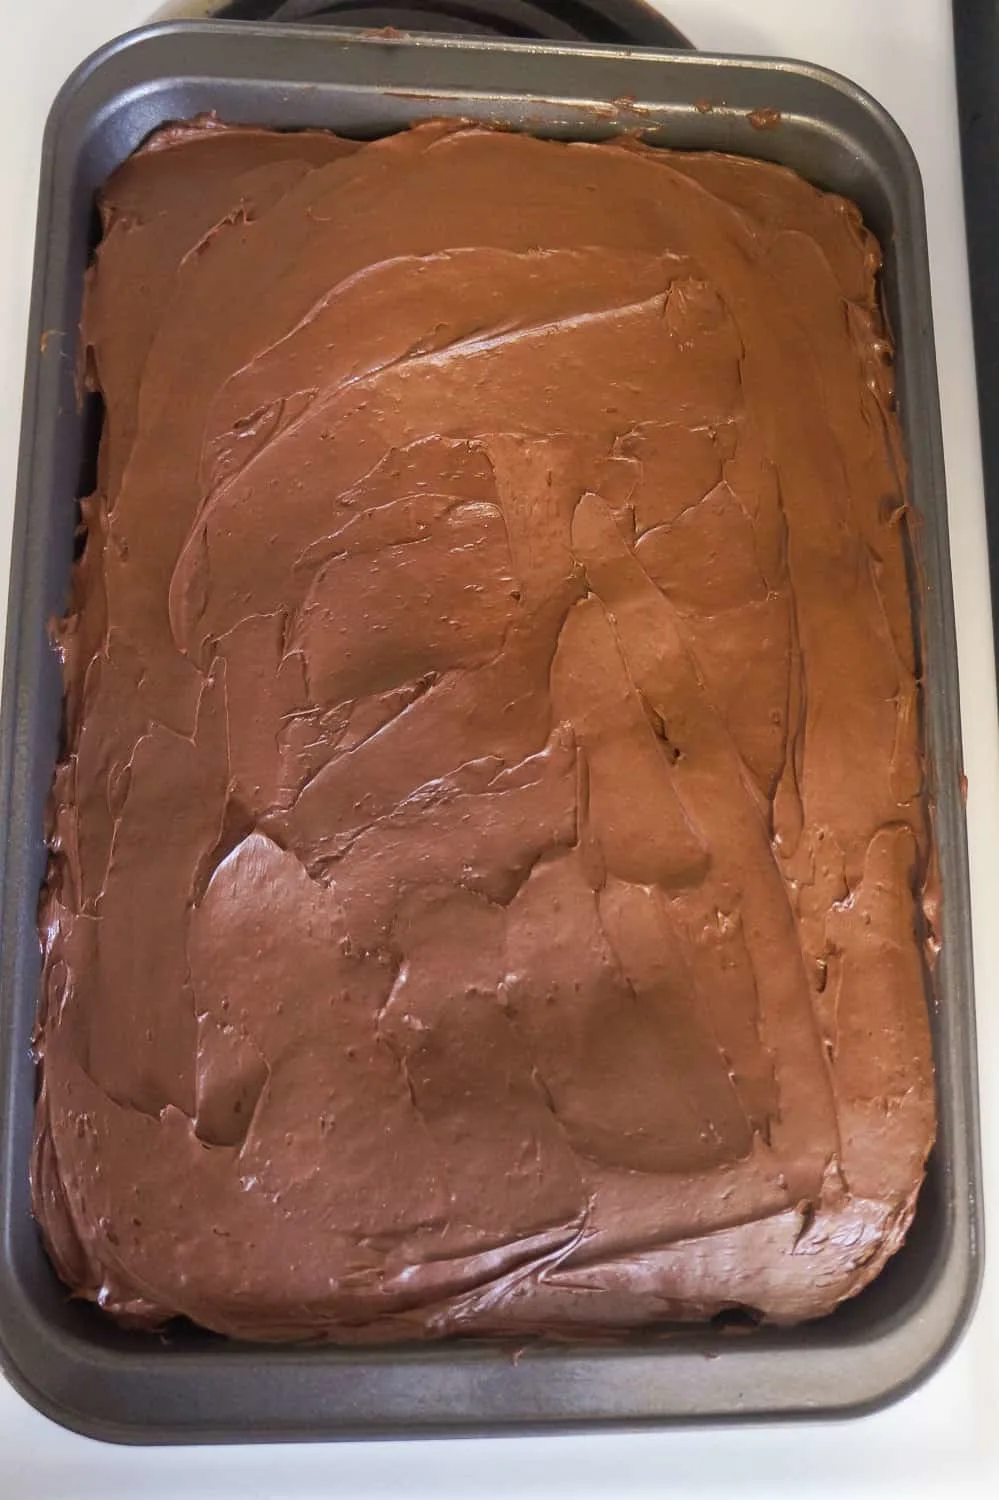 chocolate frosting on peanut butter banana sheet cake